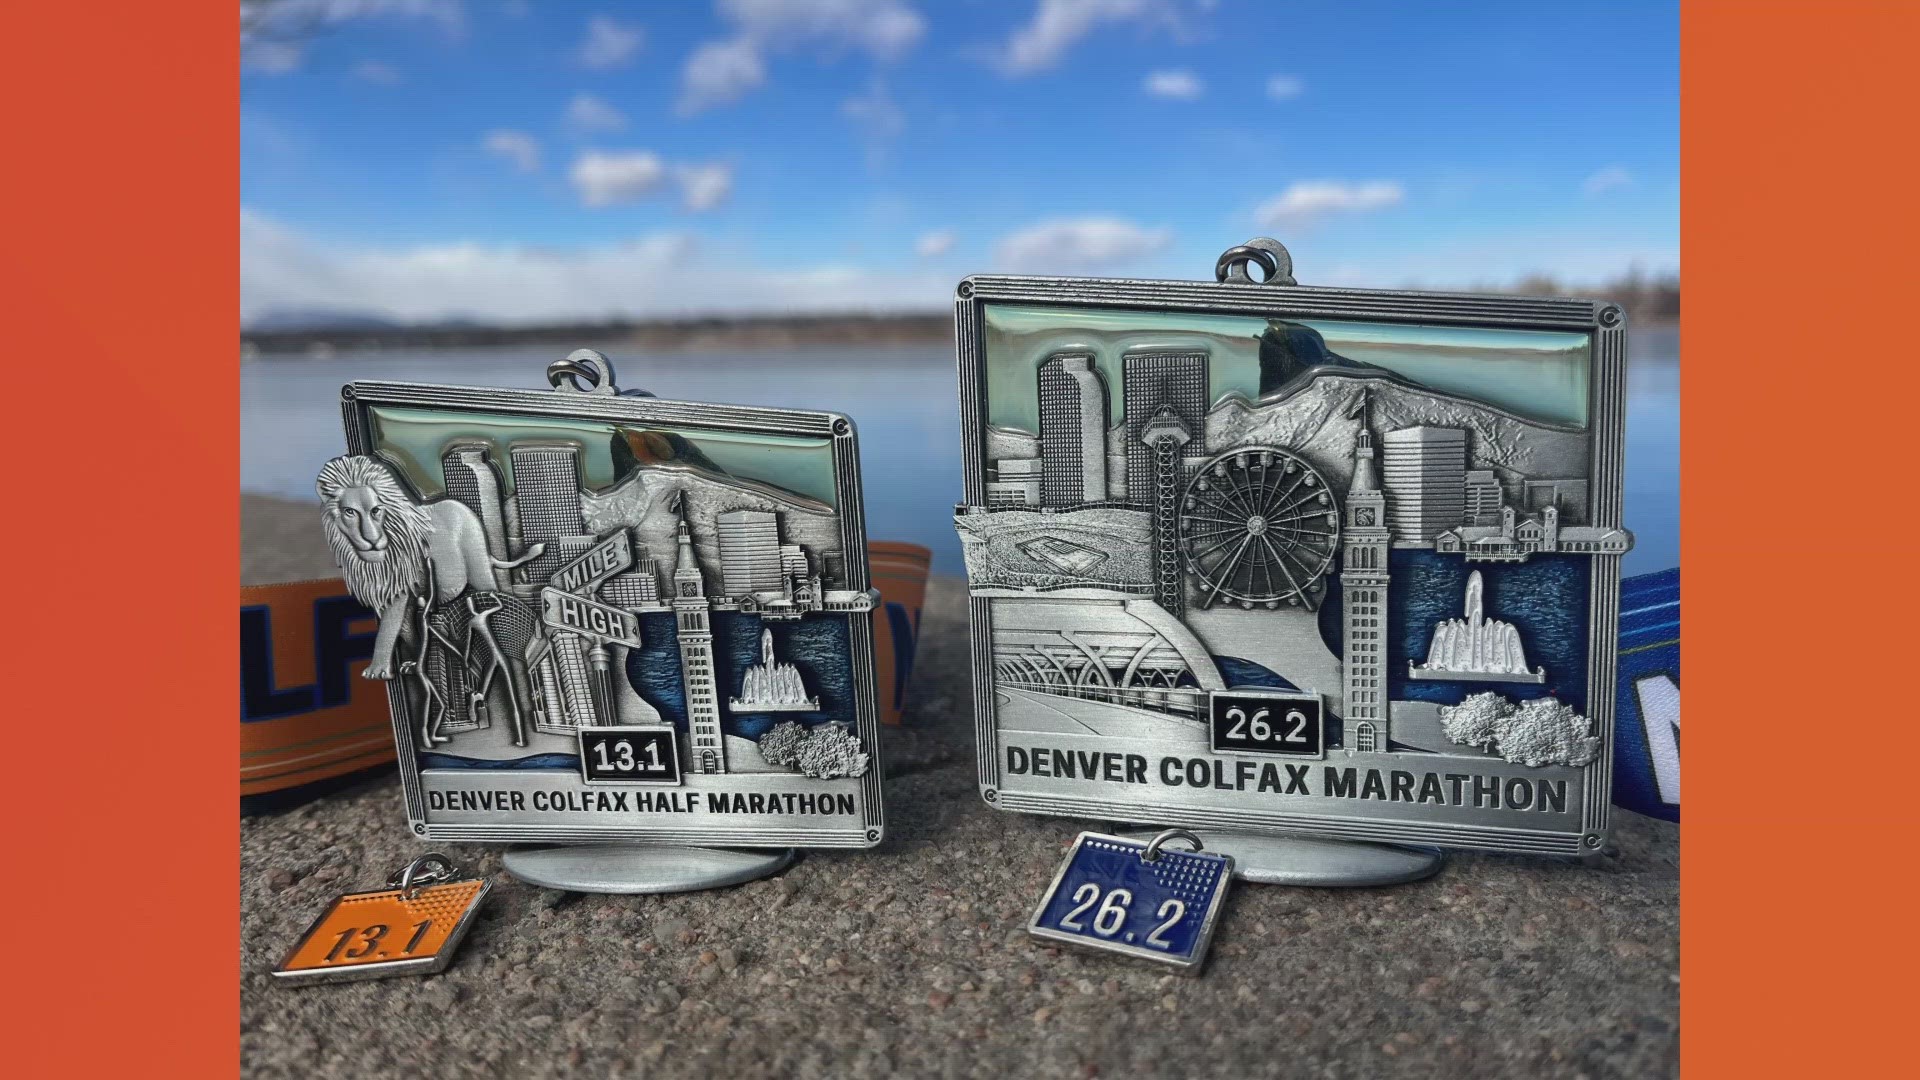 Denver's largest running event is four months away and we now have our first look at the medals runners will be racing for this year.